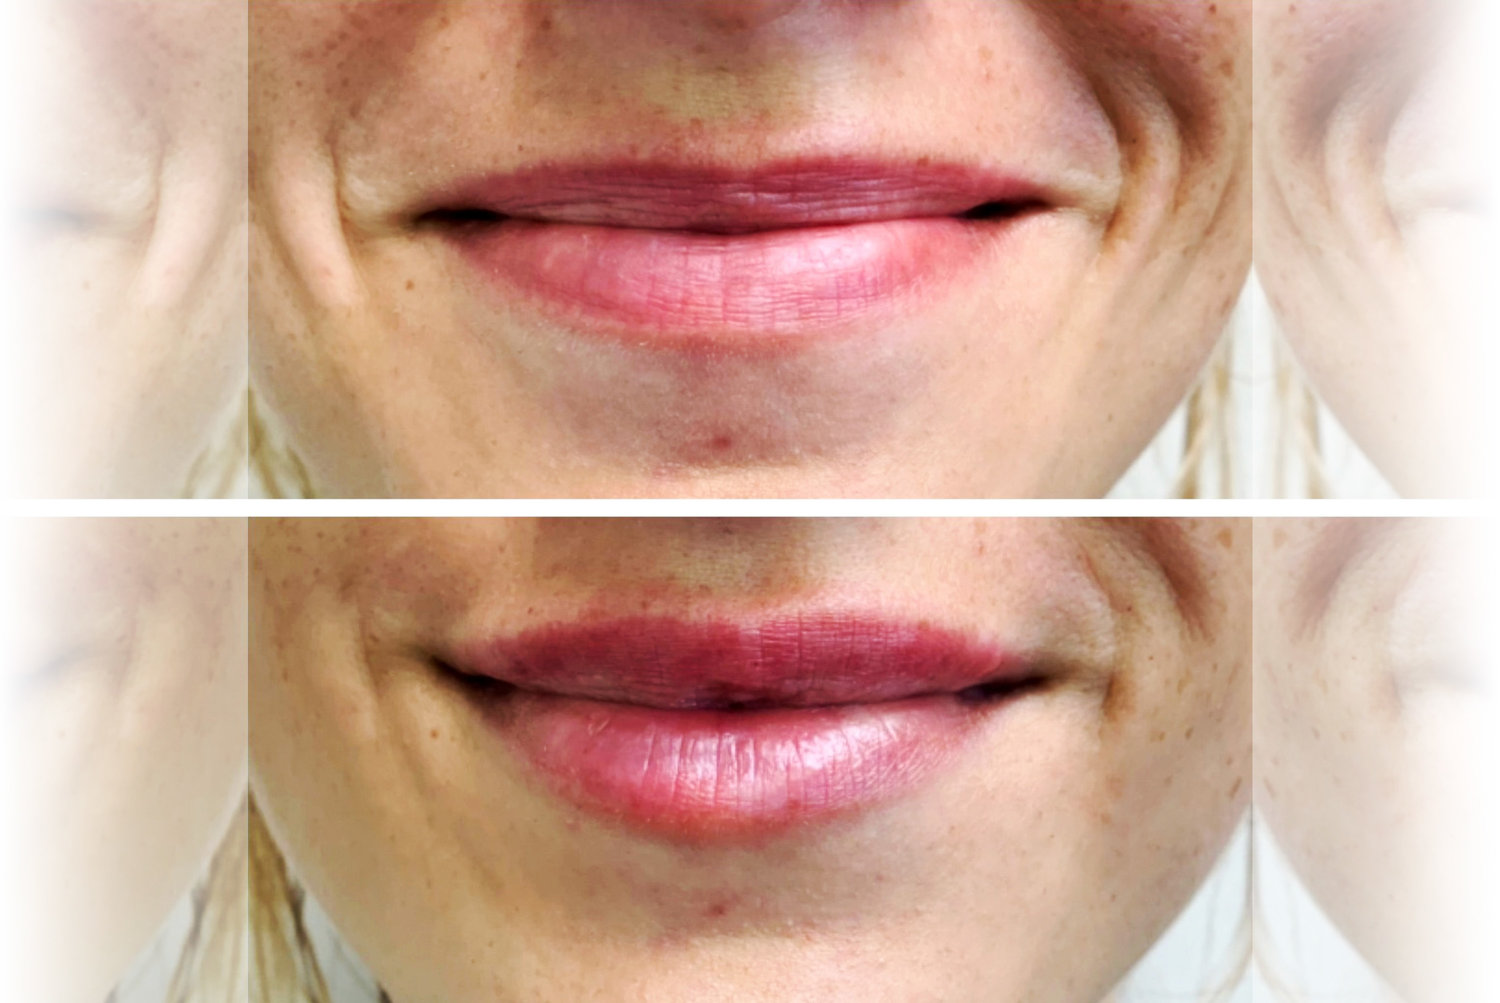 Before and after a Restylane treatment